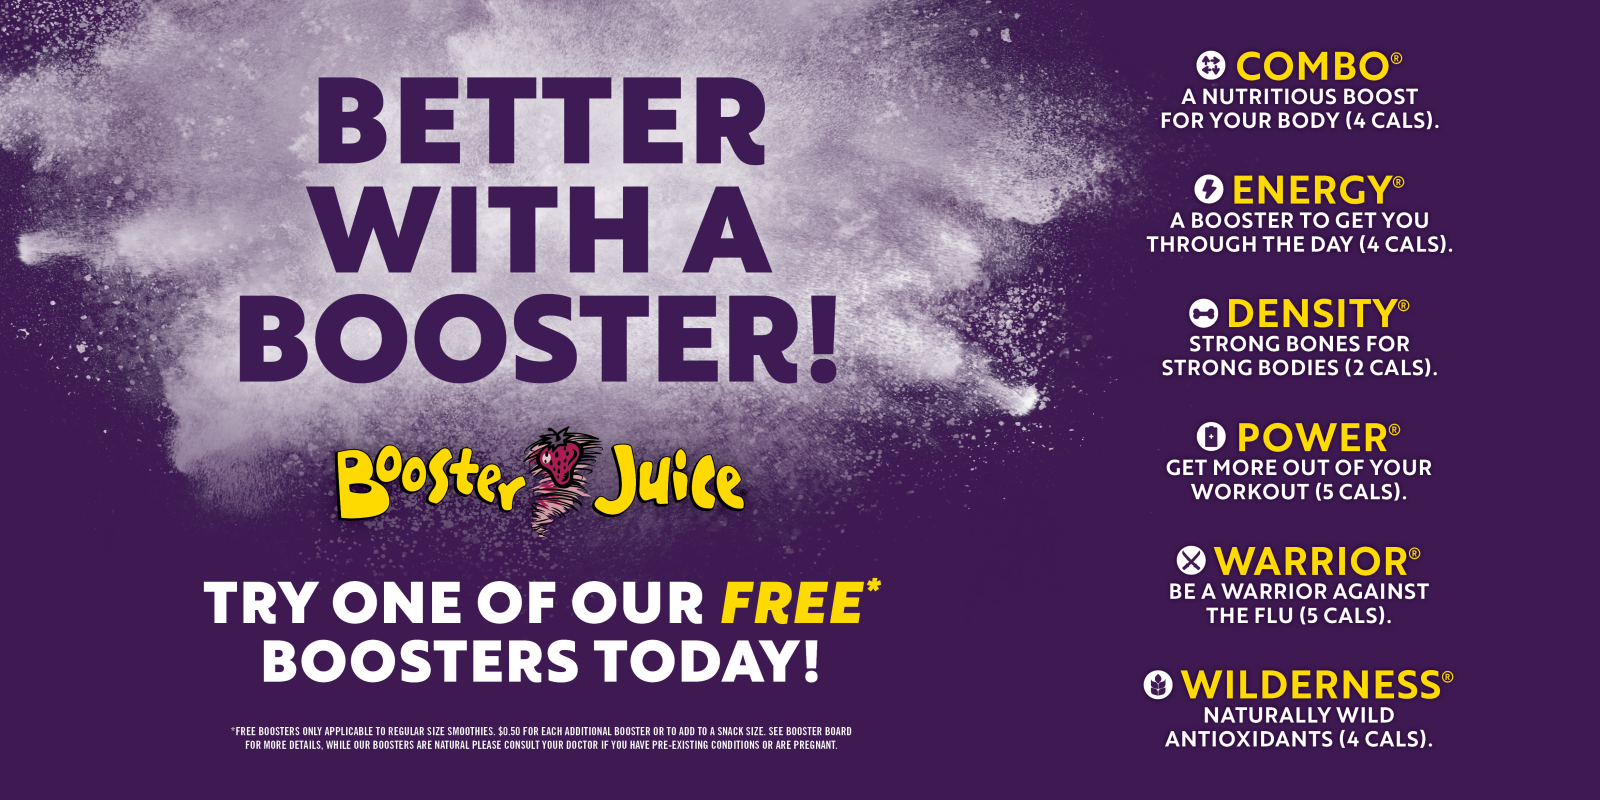 [Image] [offer] Booster Juice's Boosters